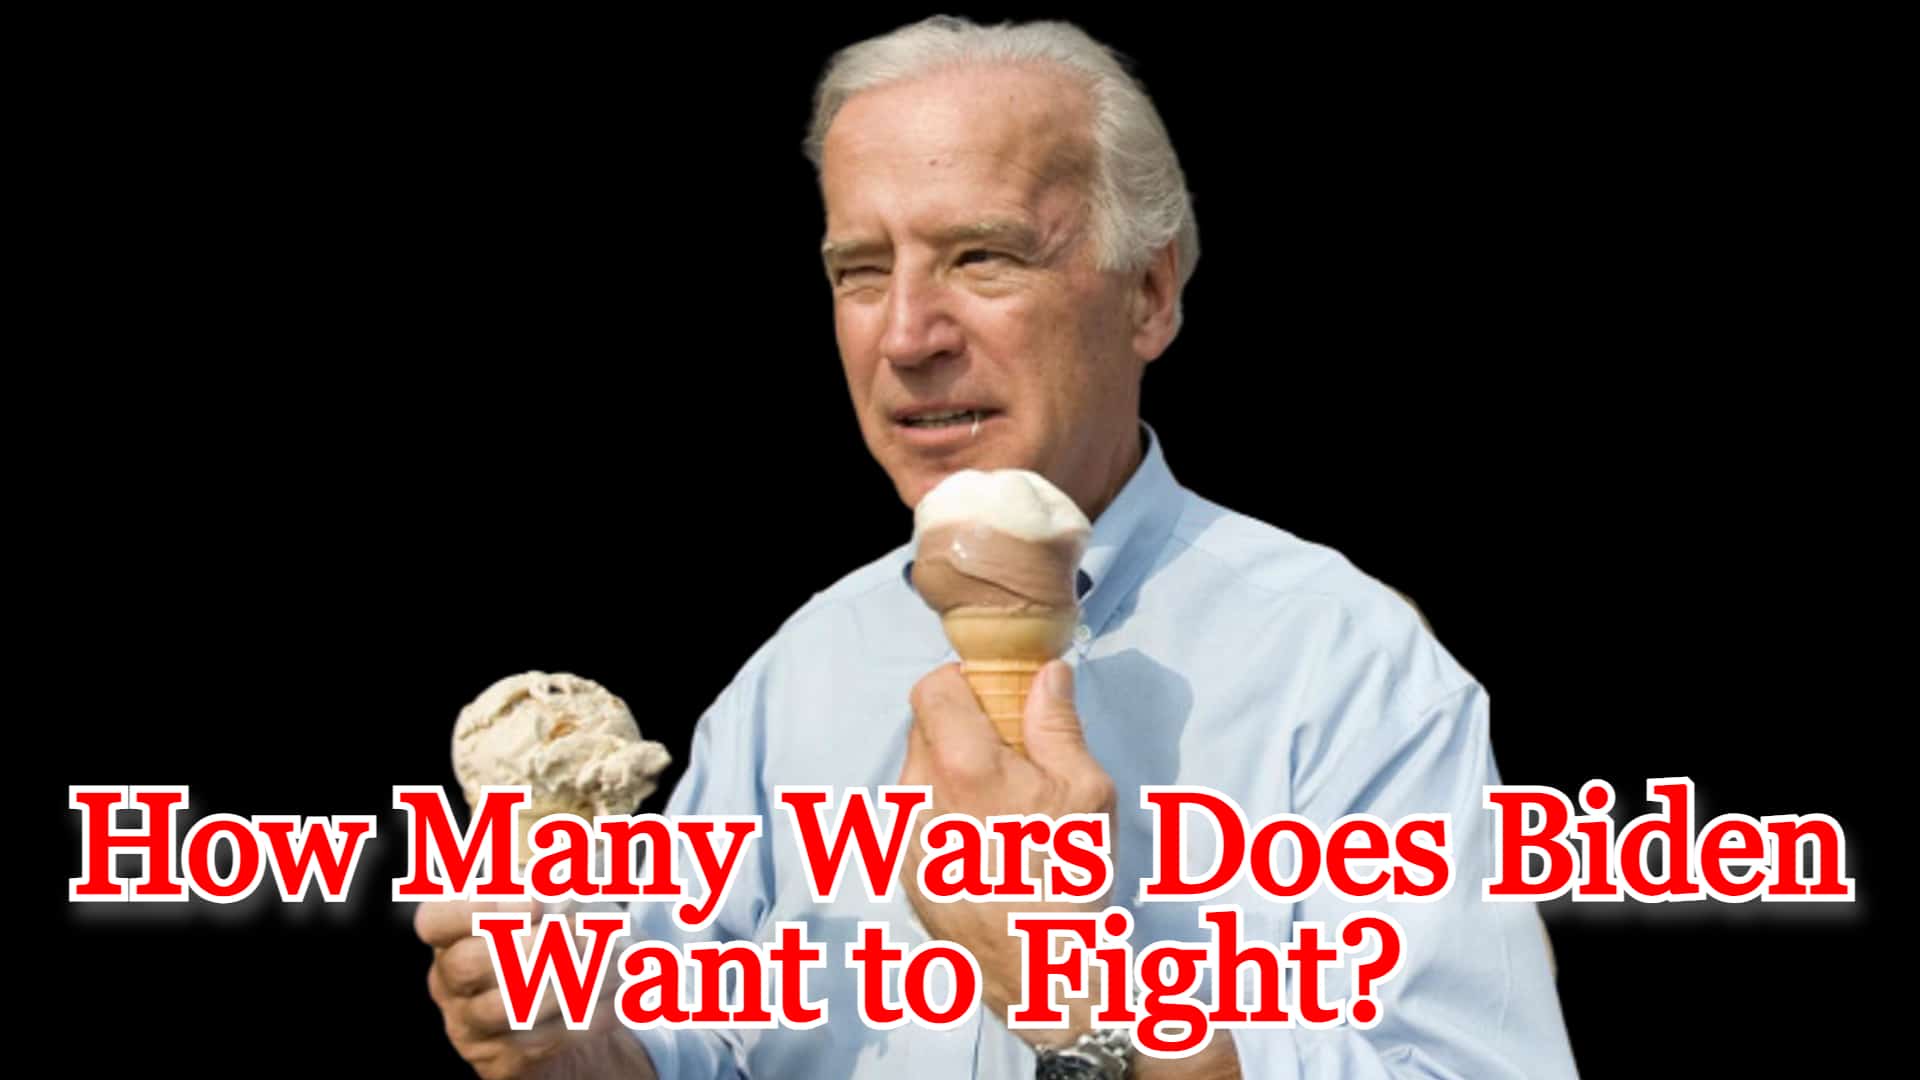 COI #488: How Many Wars Does Biden Want to Fight?